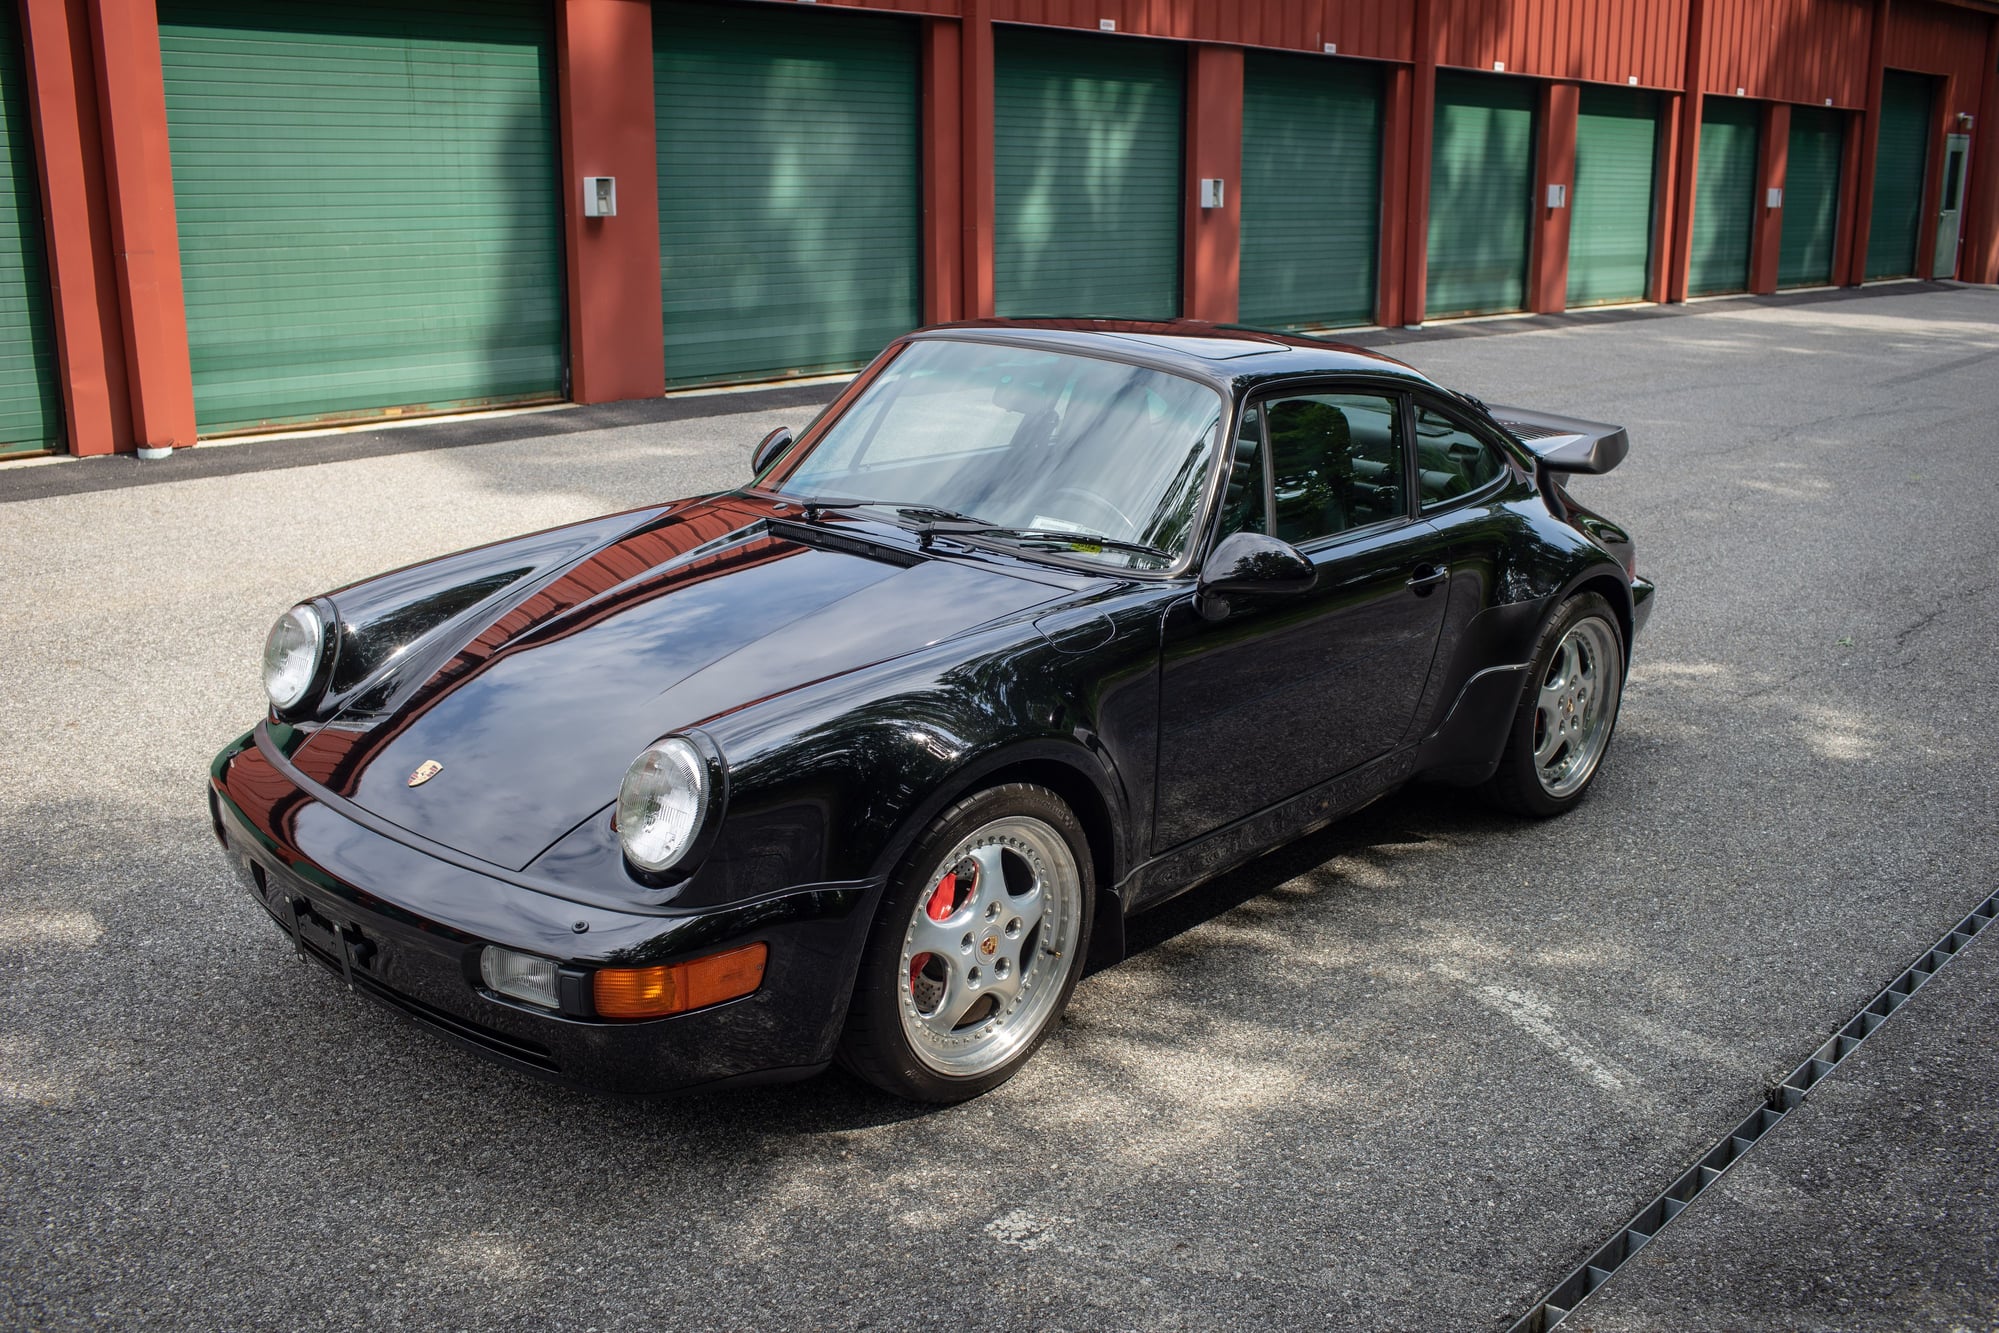 1994 Porsche 911 - 1994 Porsche 911 964 3.6 Turbo - NY - Used - VIN WP0AC2962RS480381 - 14,689 Miles - 6 cyl - 2WD - Manual - Coupe - Black - Bedford Hills, NY 10507, United States